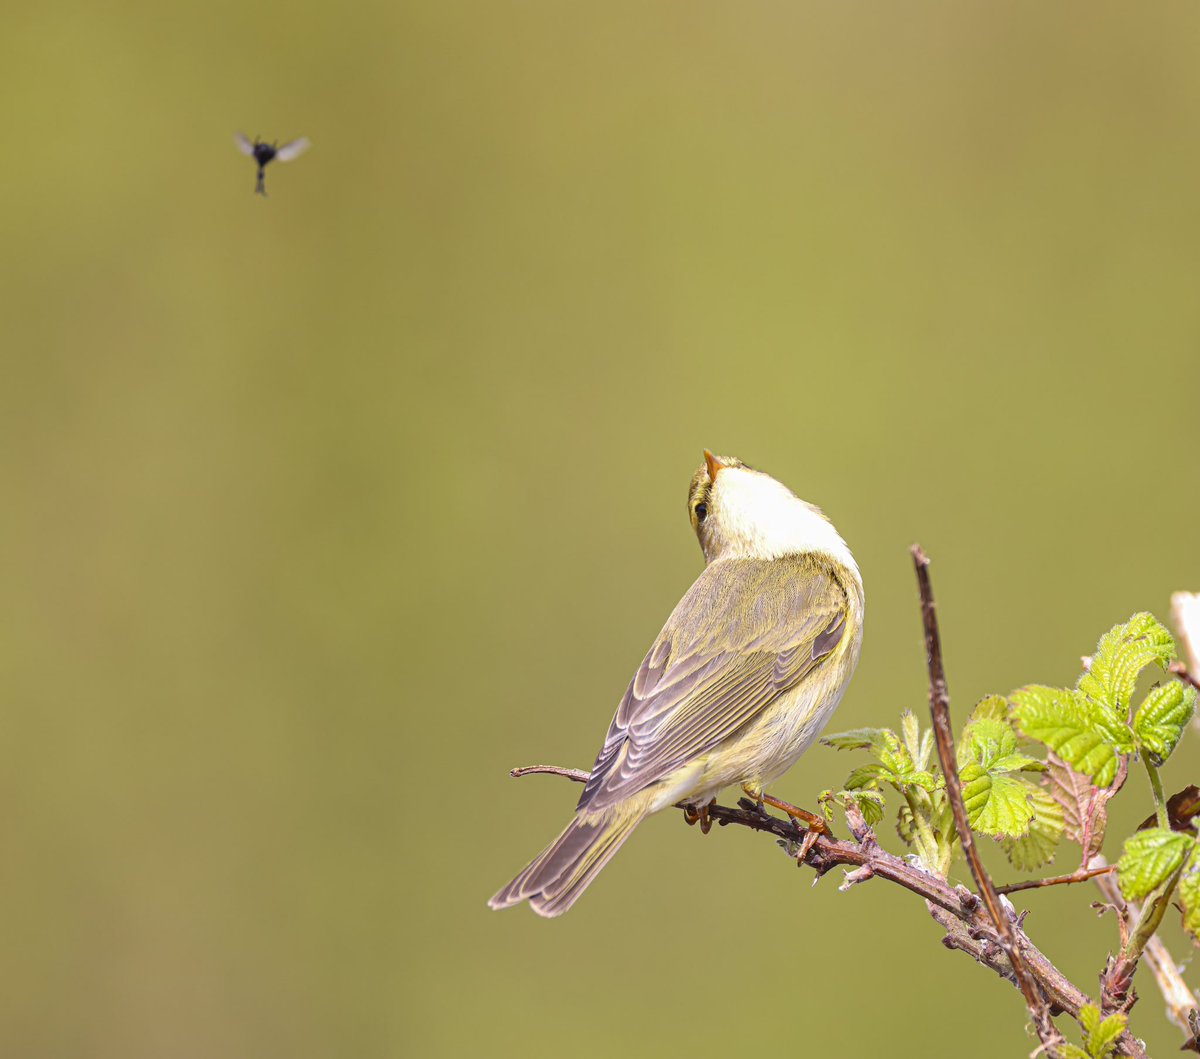 Todays thread, photobombed 😂 I’ll start with this Willow Warbler earlier today